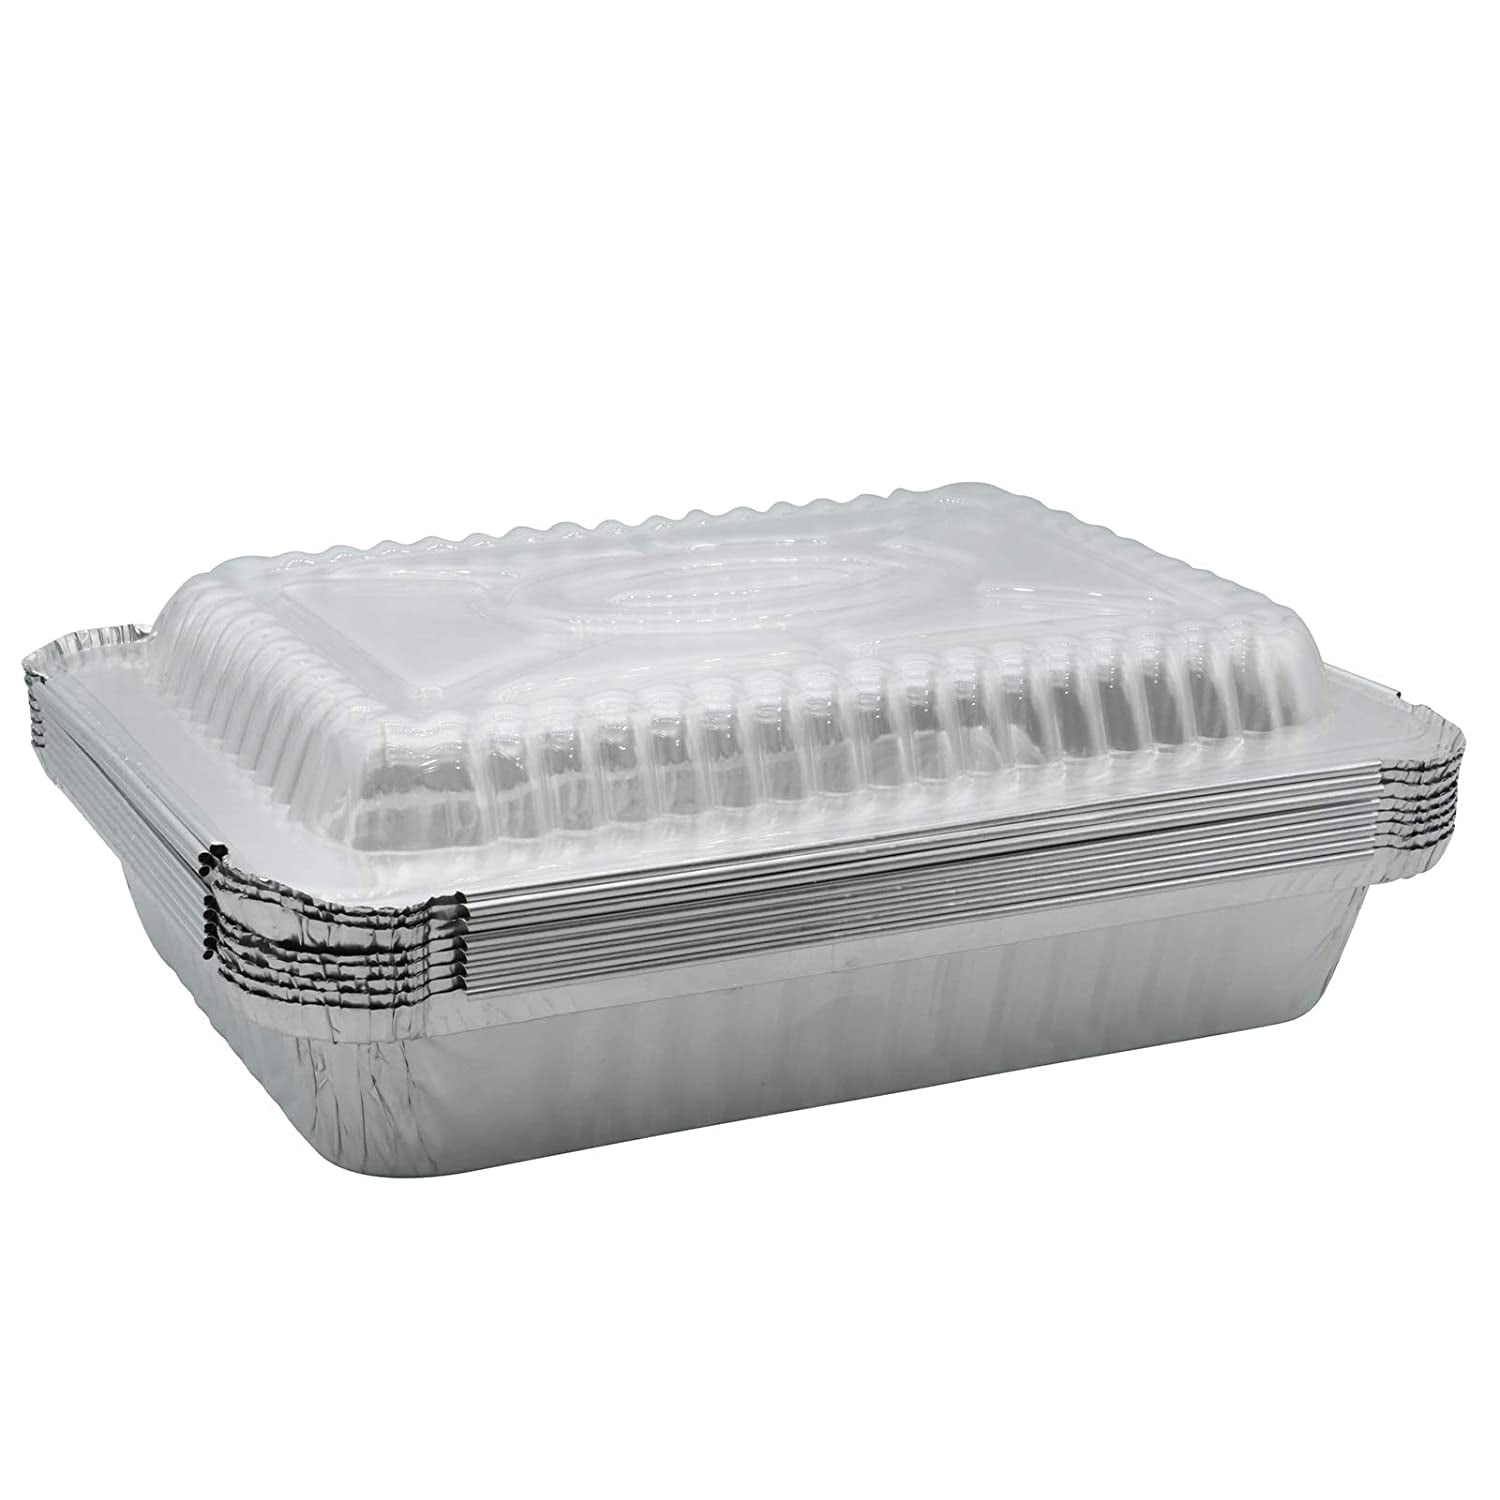 Aluminum Pans Trays 6.2x8.6 inch 25 Pack - Disposable Roasting & Baking Pan  Food Storage Tray Great for BBQ, Cooking, Heating, Freezing Takeeout and  Serving Food 